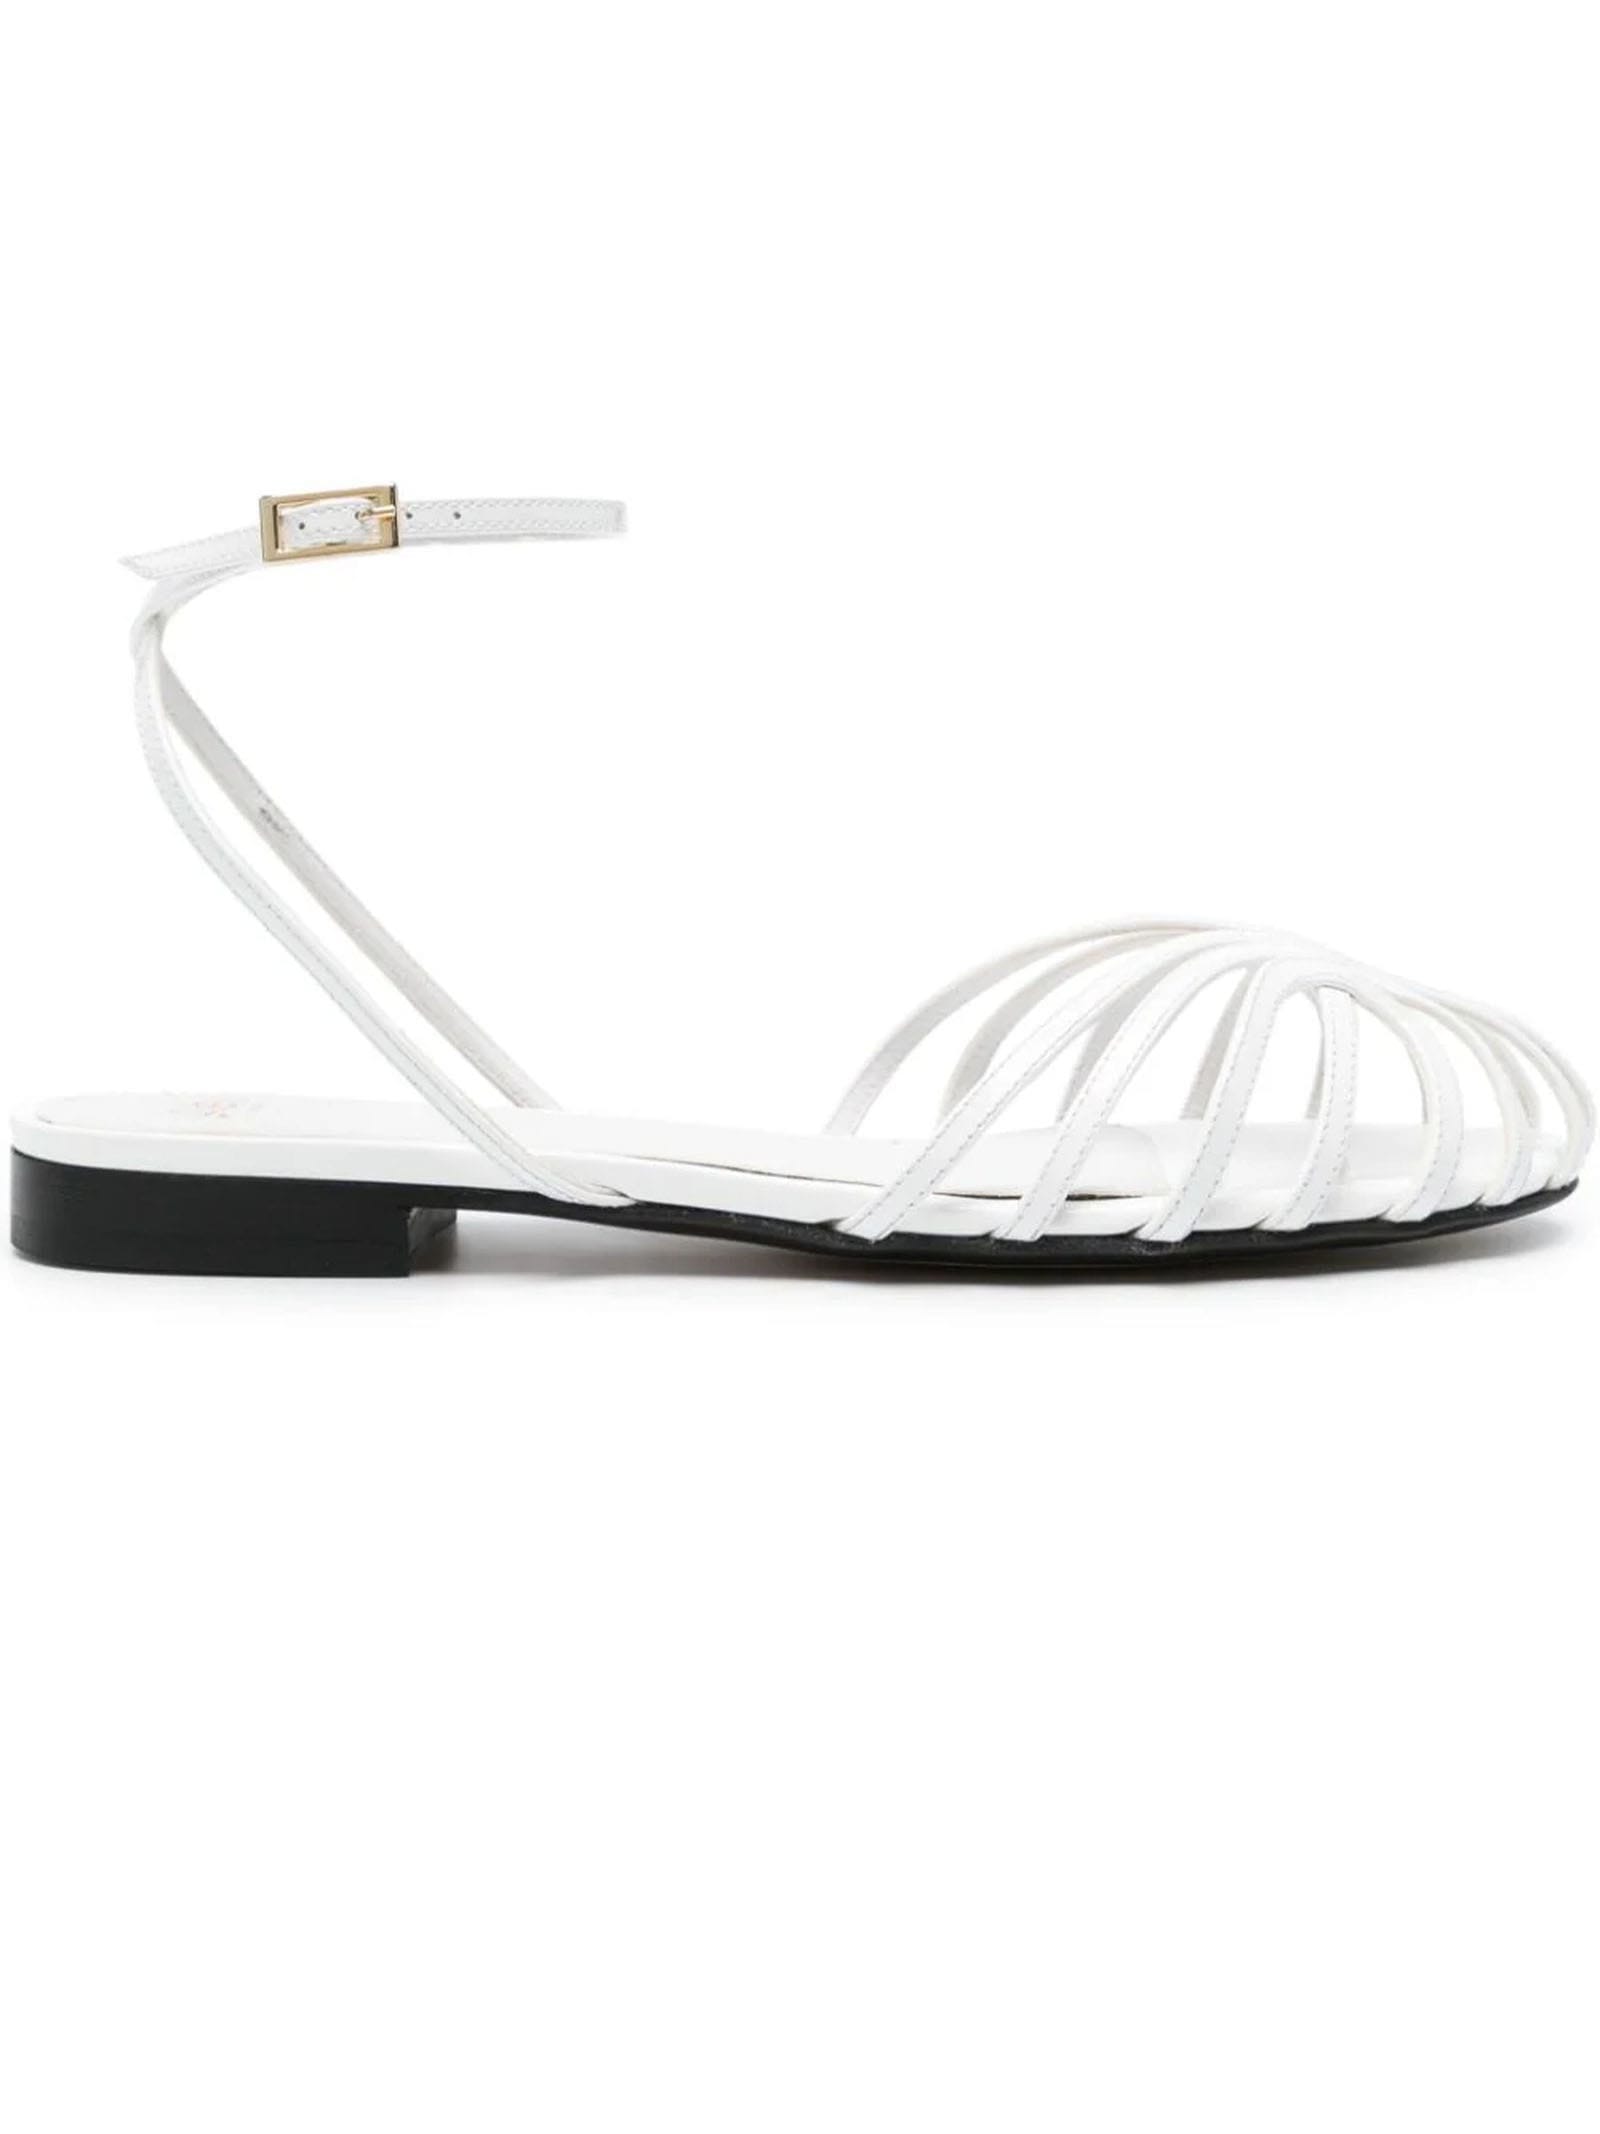 White Calf Leather Sandals